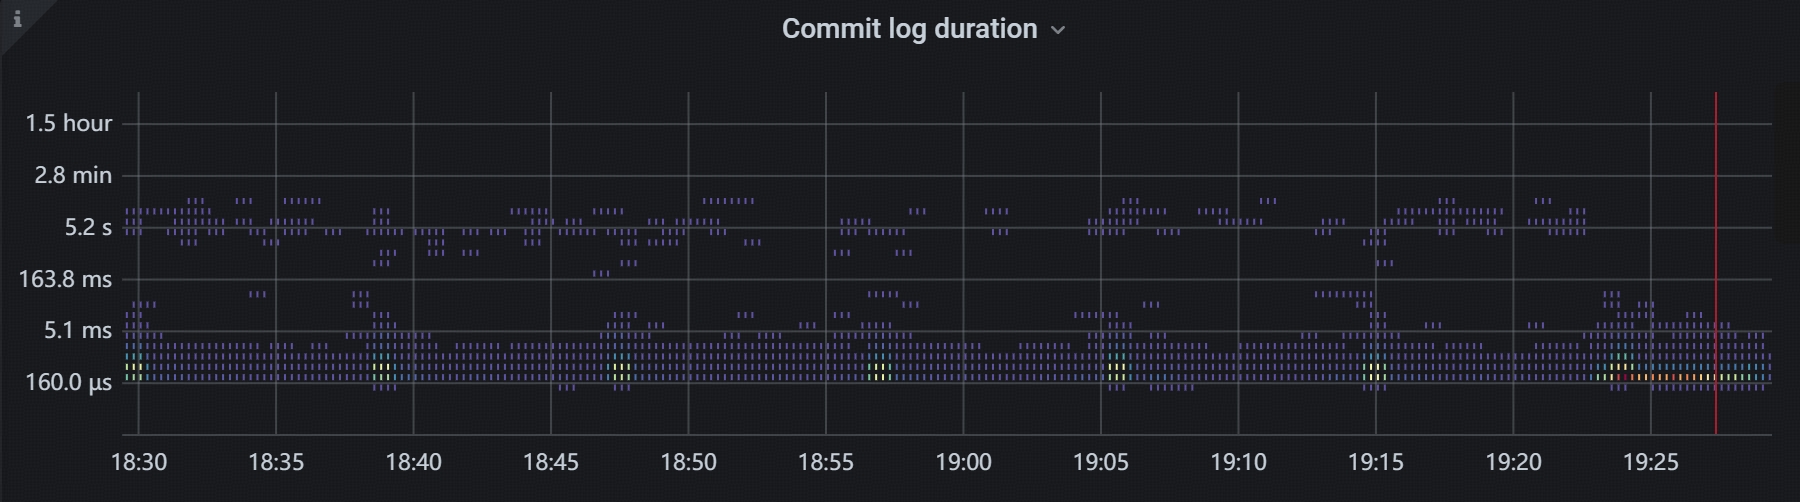 Check Commit log duration